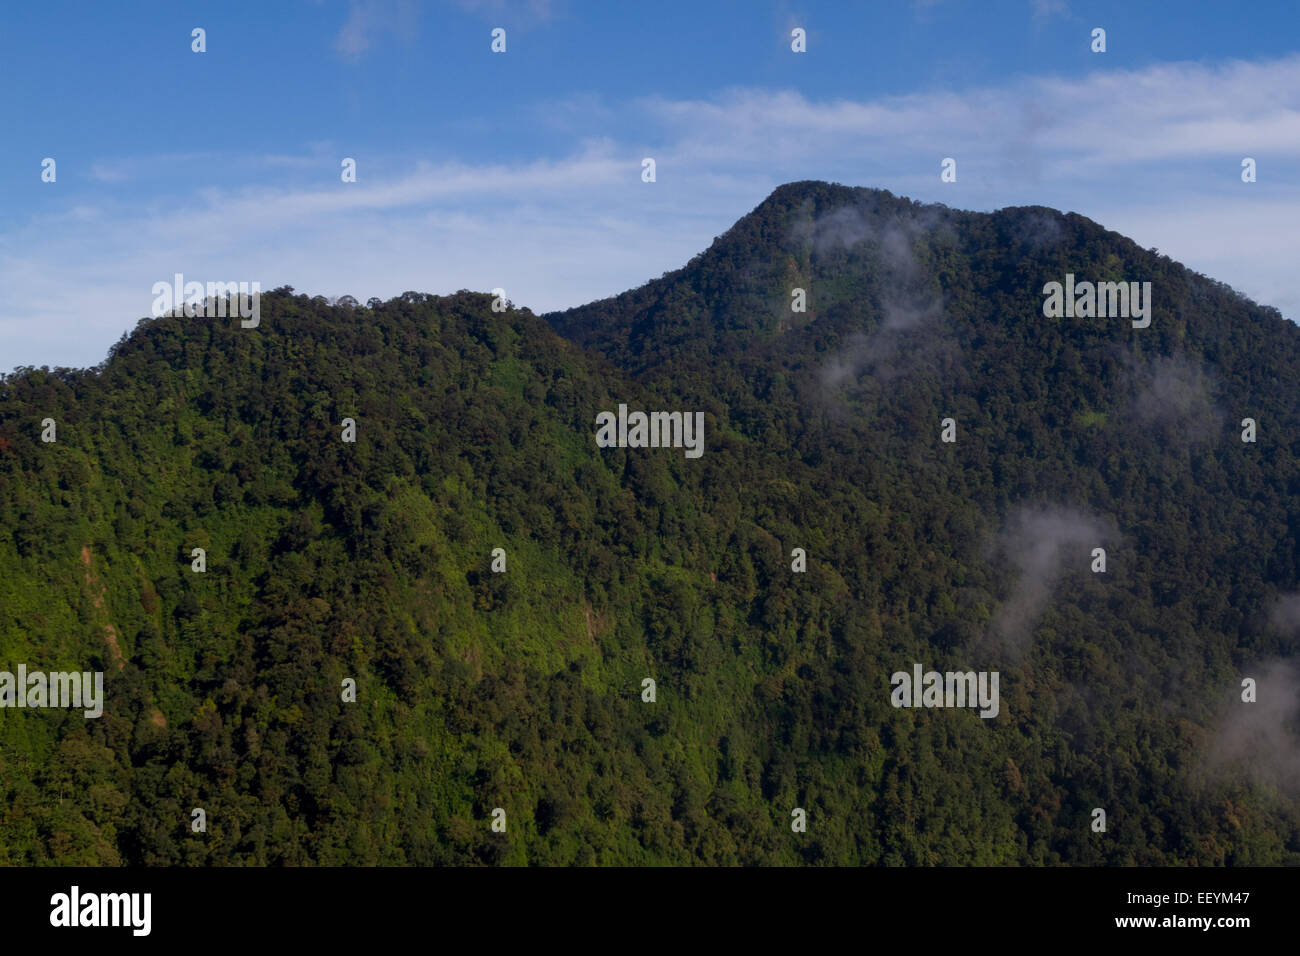 One of Mount Salak's peak in West Java province of Indonesia. Stock Photo